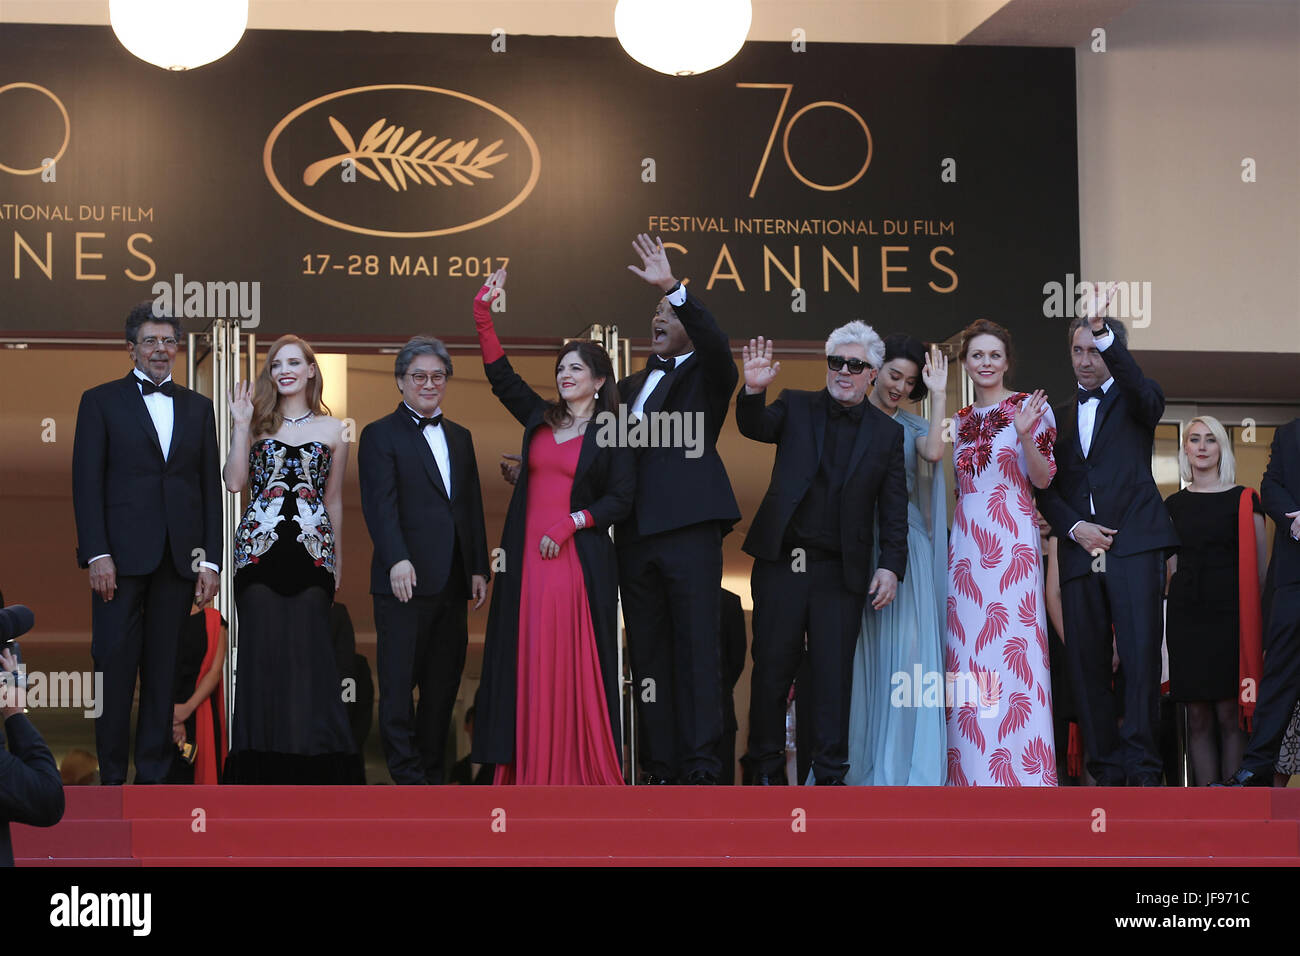 (L-R) Gabriel Yared, Jessica Chastain, Park Chan-wook, Agnes Jaoui and Will Smith, Pedro Almodovar, Fan Bingbing, Maren Ade and Paolo Sorrentino attend the Ismael's Ghosts screening and Opening Gala during the 70th annual Cannes Film Festival at Palais des Festivals on May 17, 2017 in Cannes, France. Stock Photo